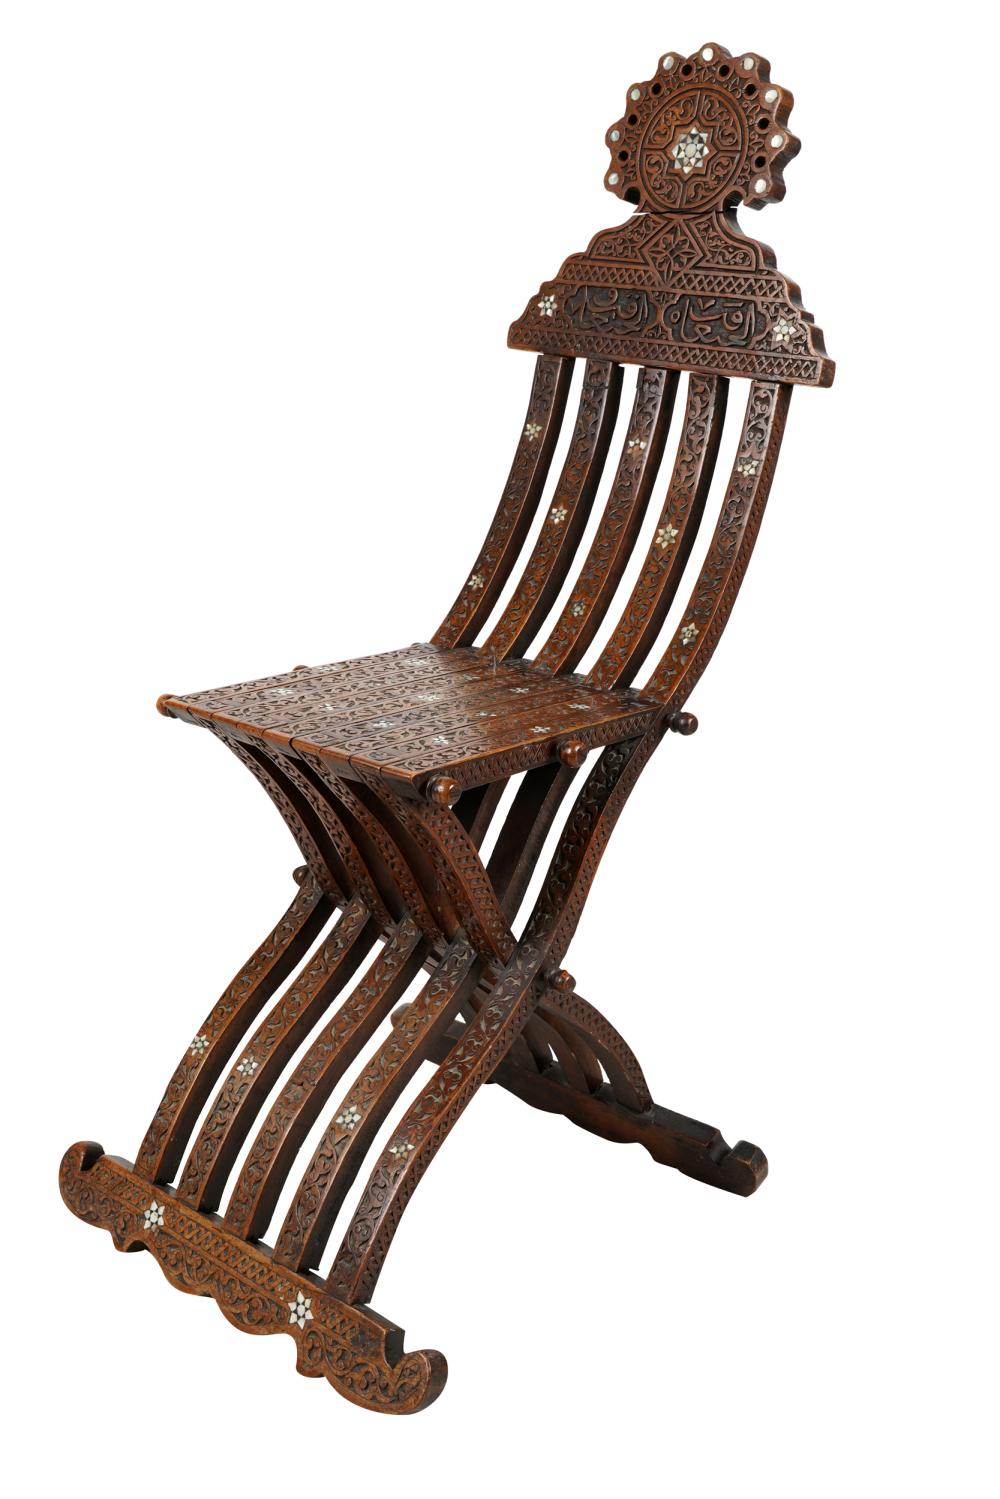 SYRIAN INLAID FOLDING CHAIRCondition: